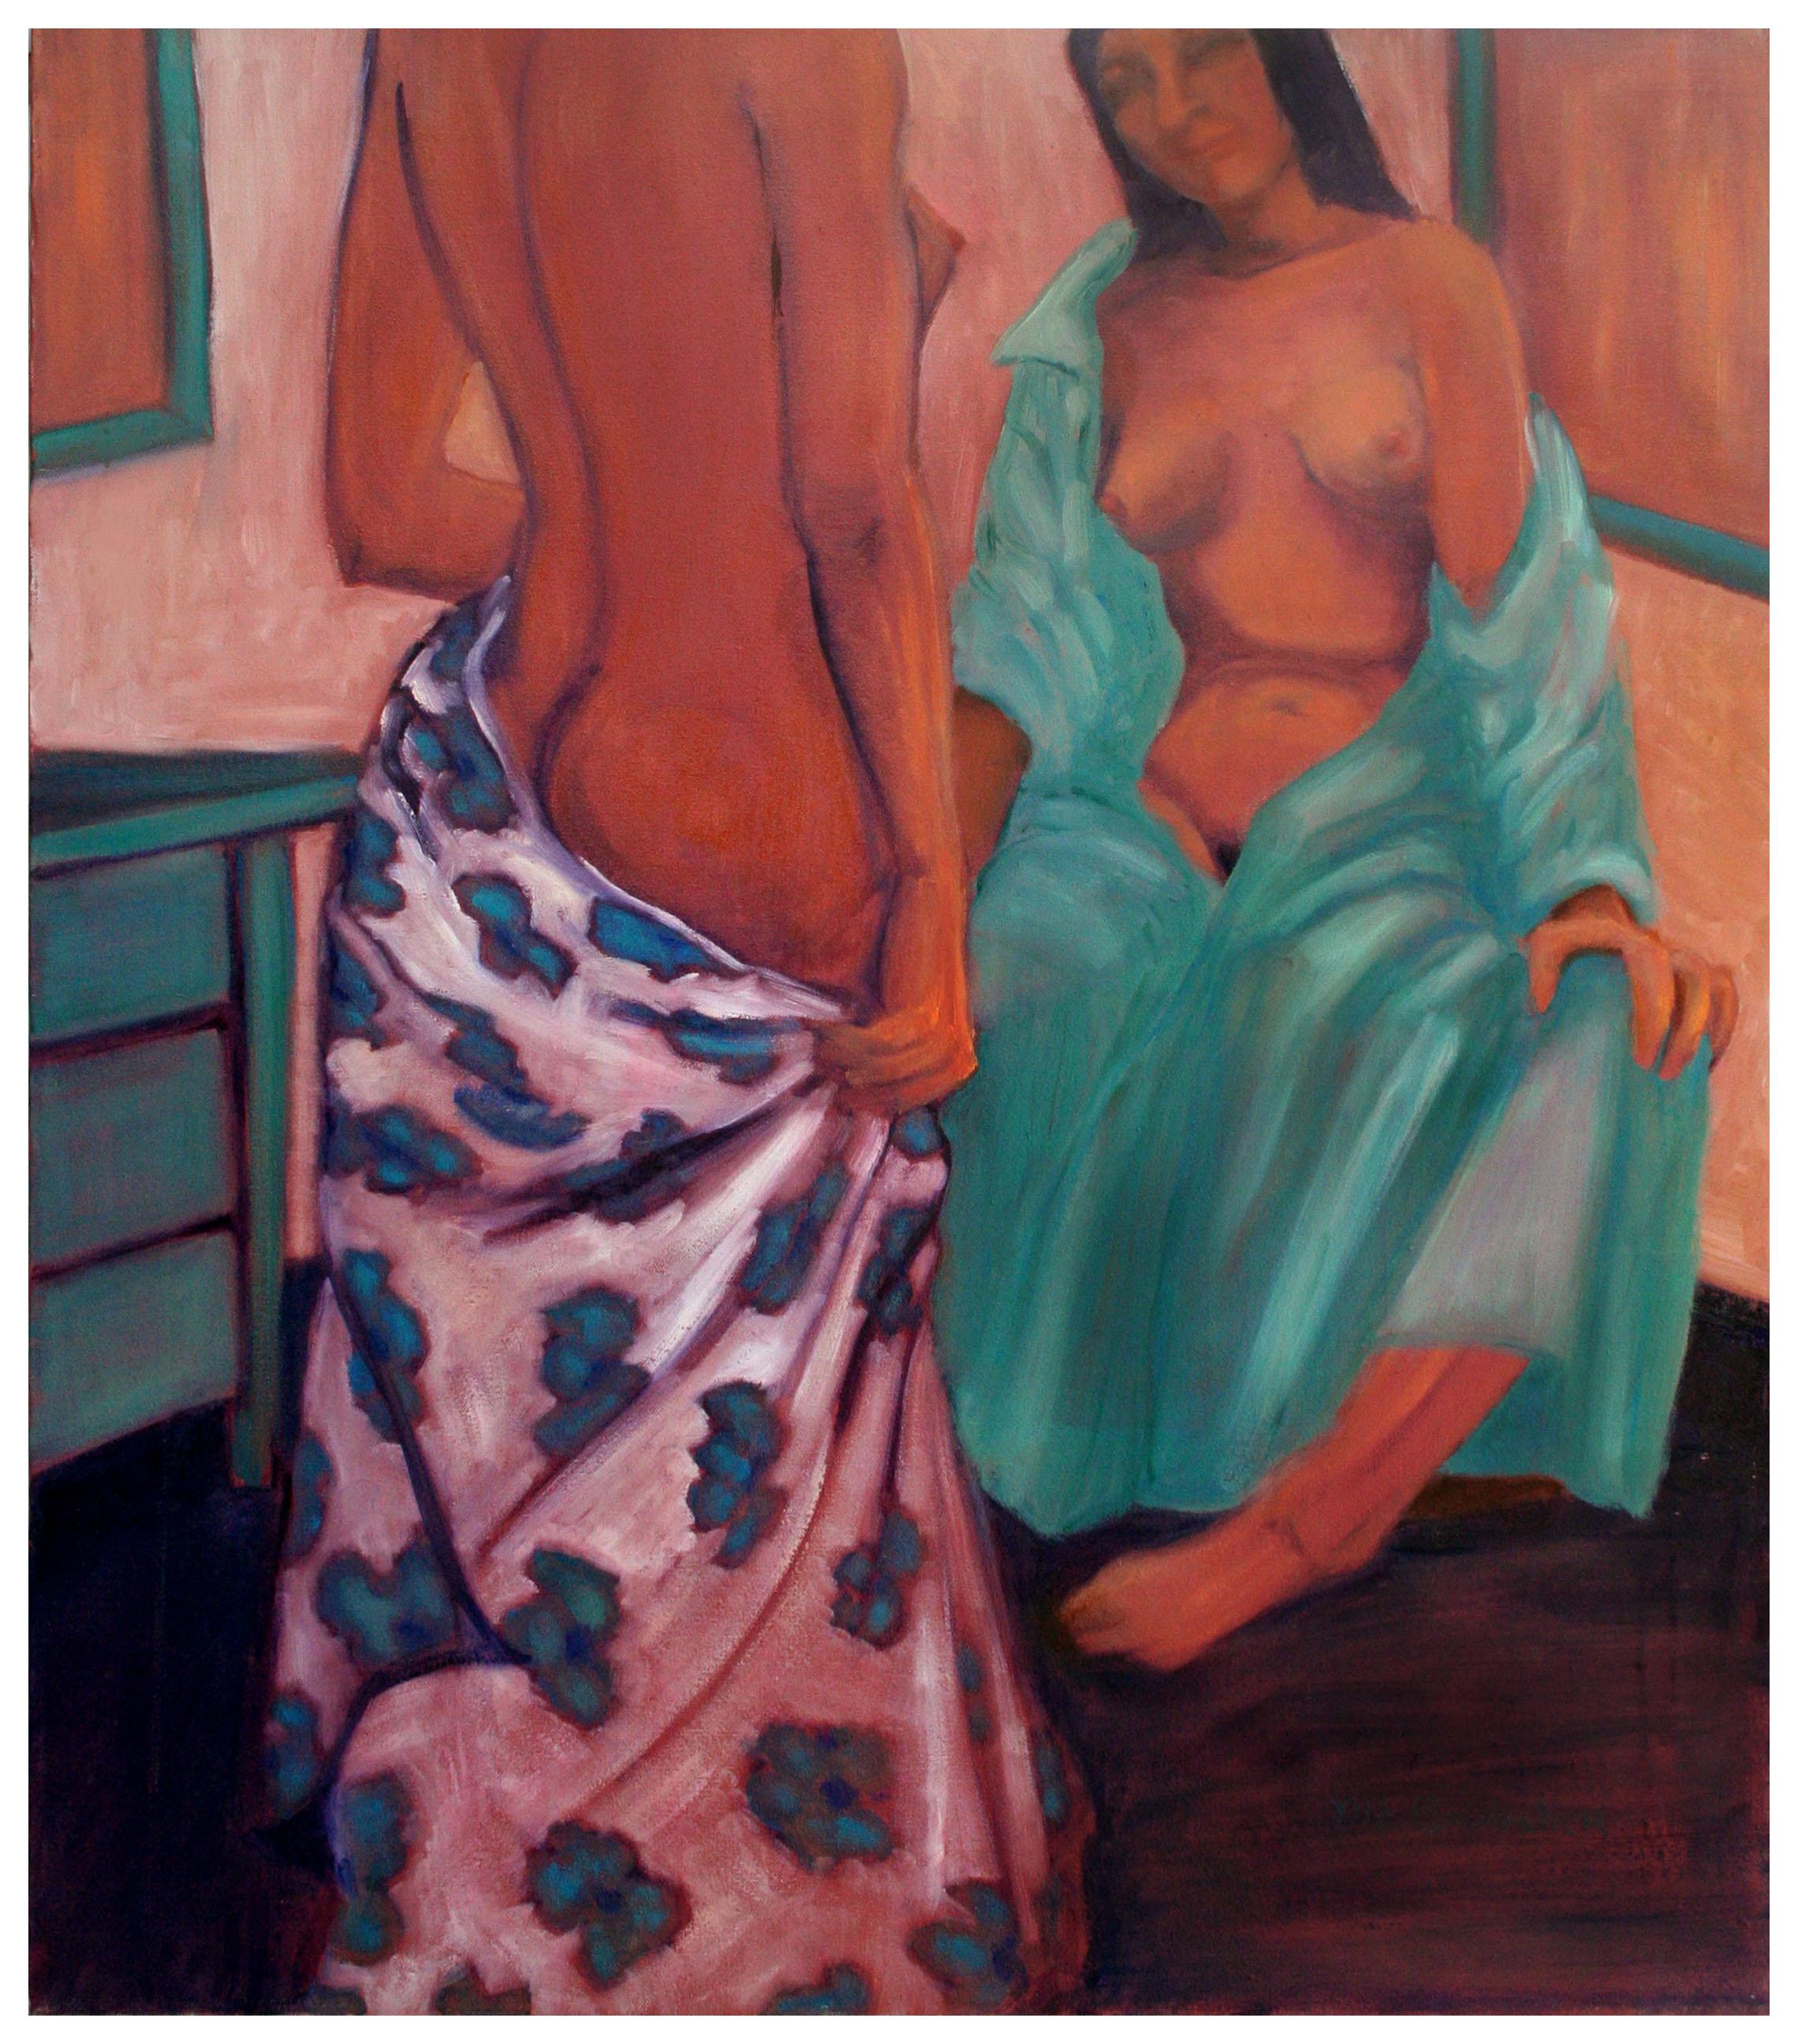 Modern Figurative Study, Two Models with Drapes - Painting by Molly E. Brubaker